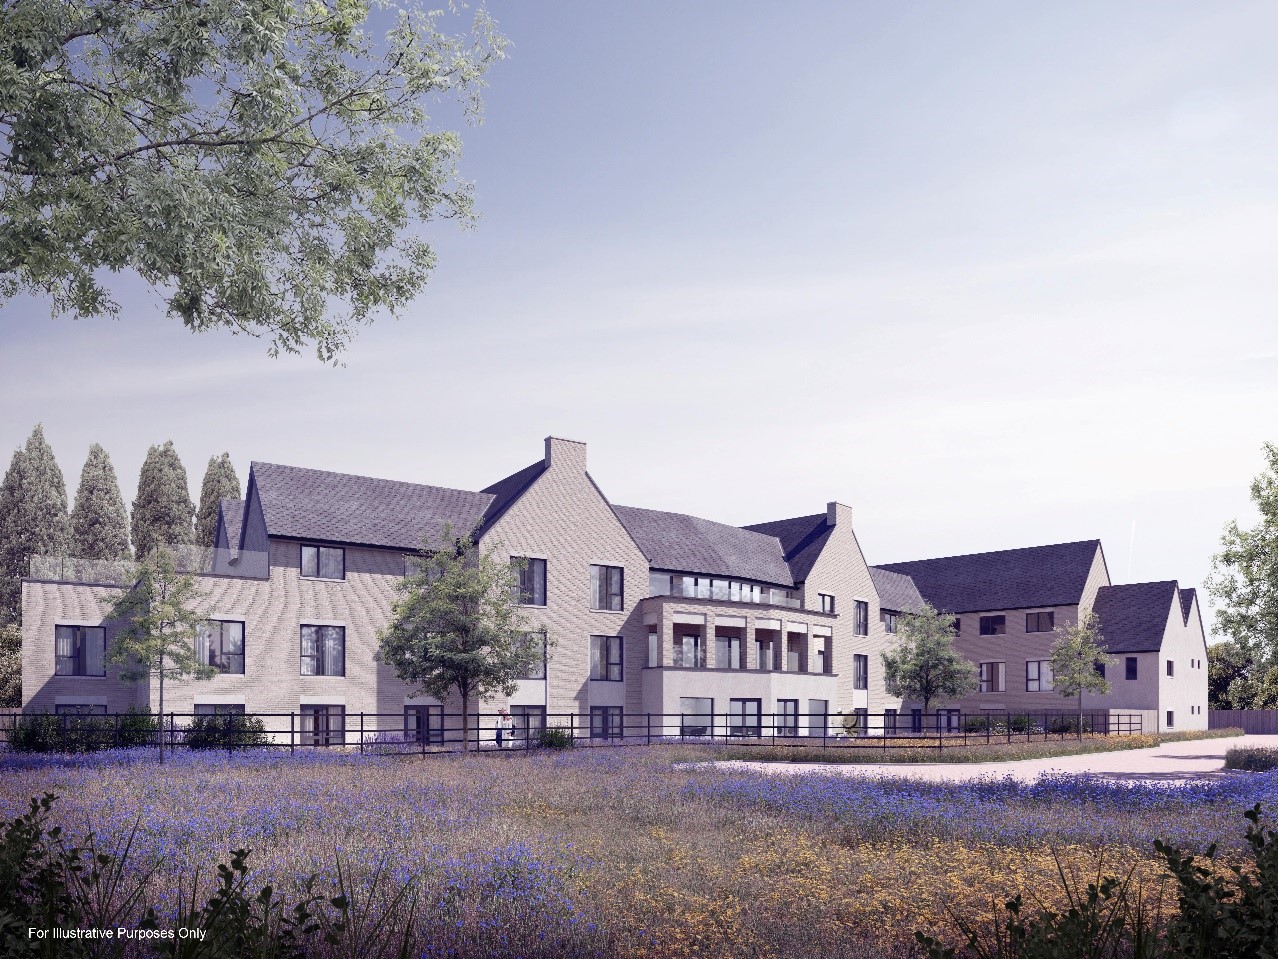 CGI of the planned care home development, provided by Torsion Care Ltd